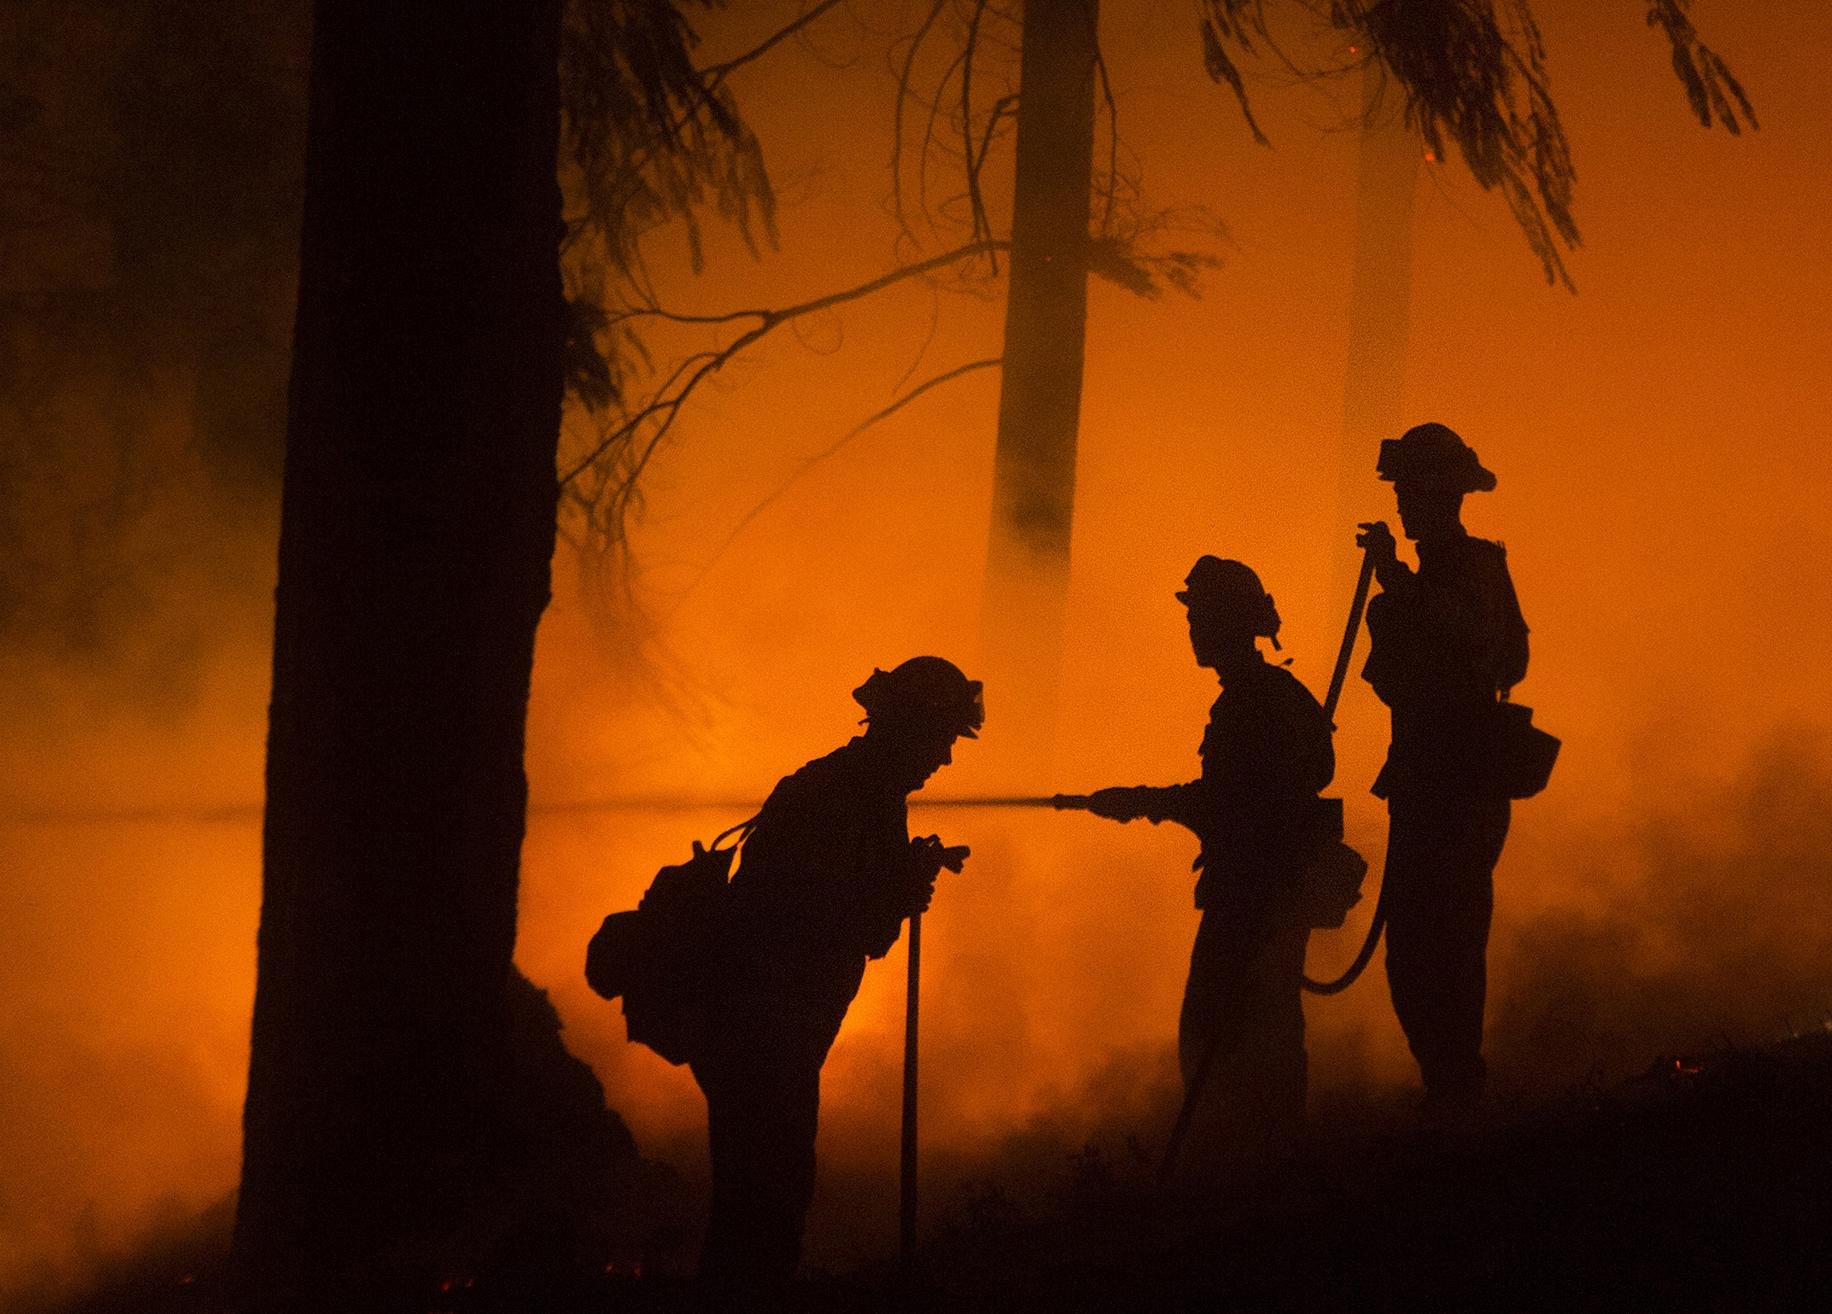 Firefighters battle the King Fire in Fresh Pond, Calif. on Sept. 17, 2014.